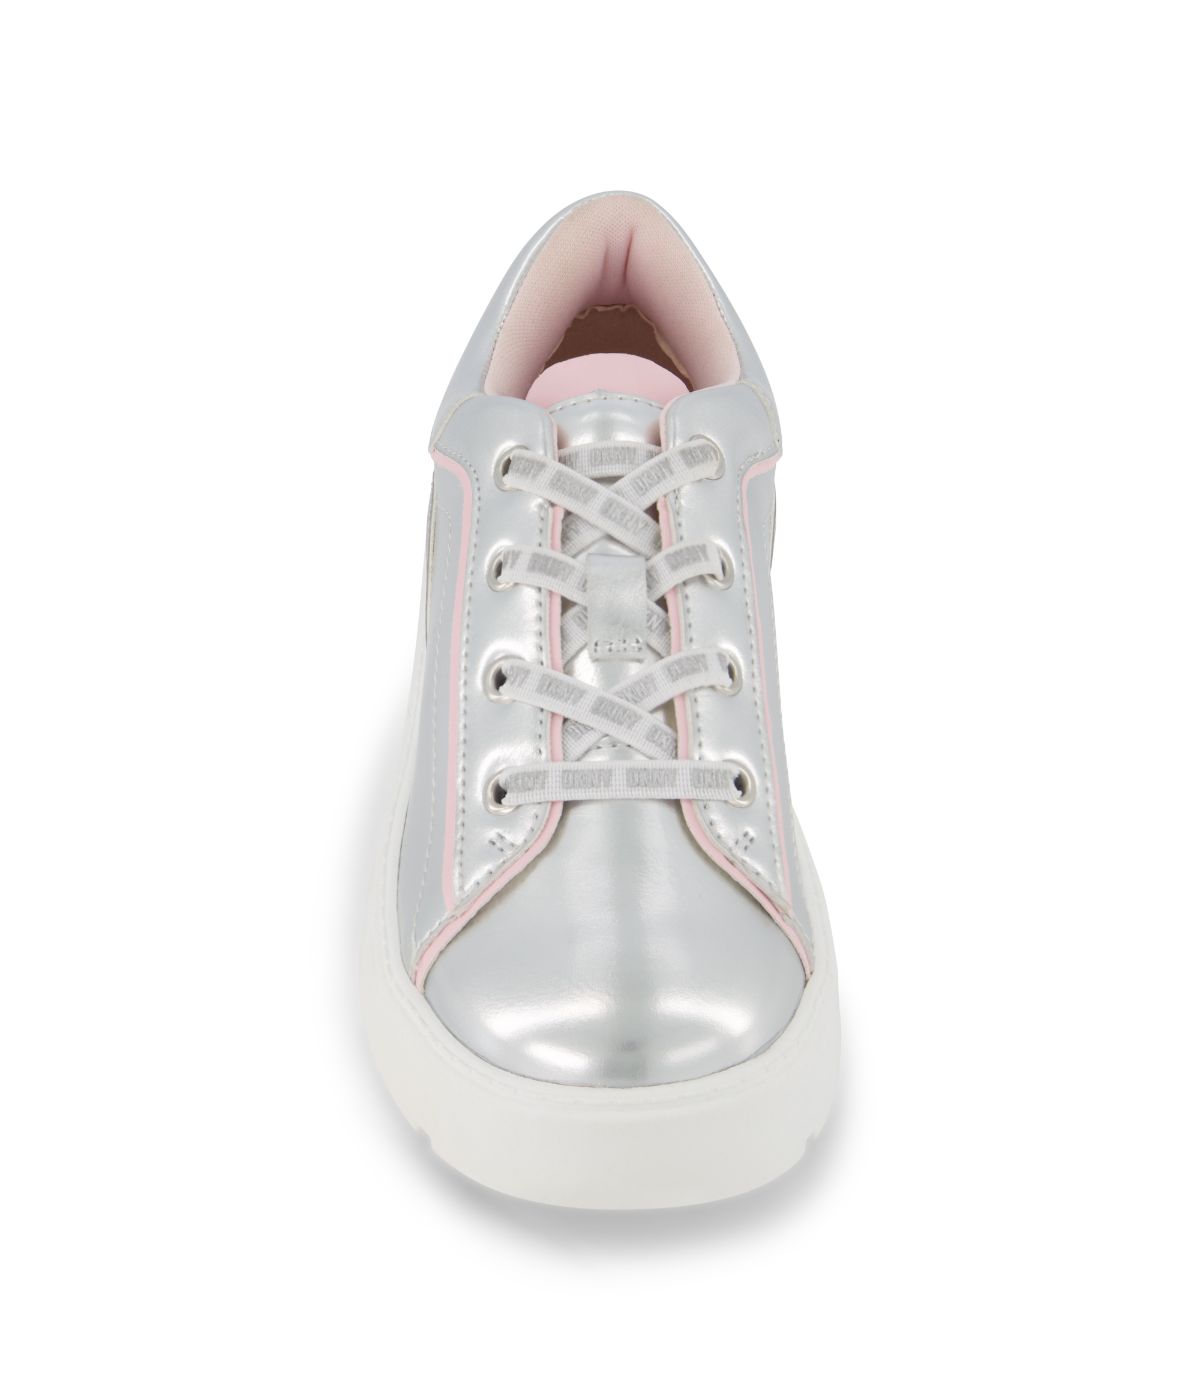 Low Top Court Shoe On A Platform Outsole Silver 